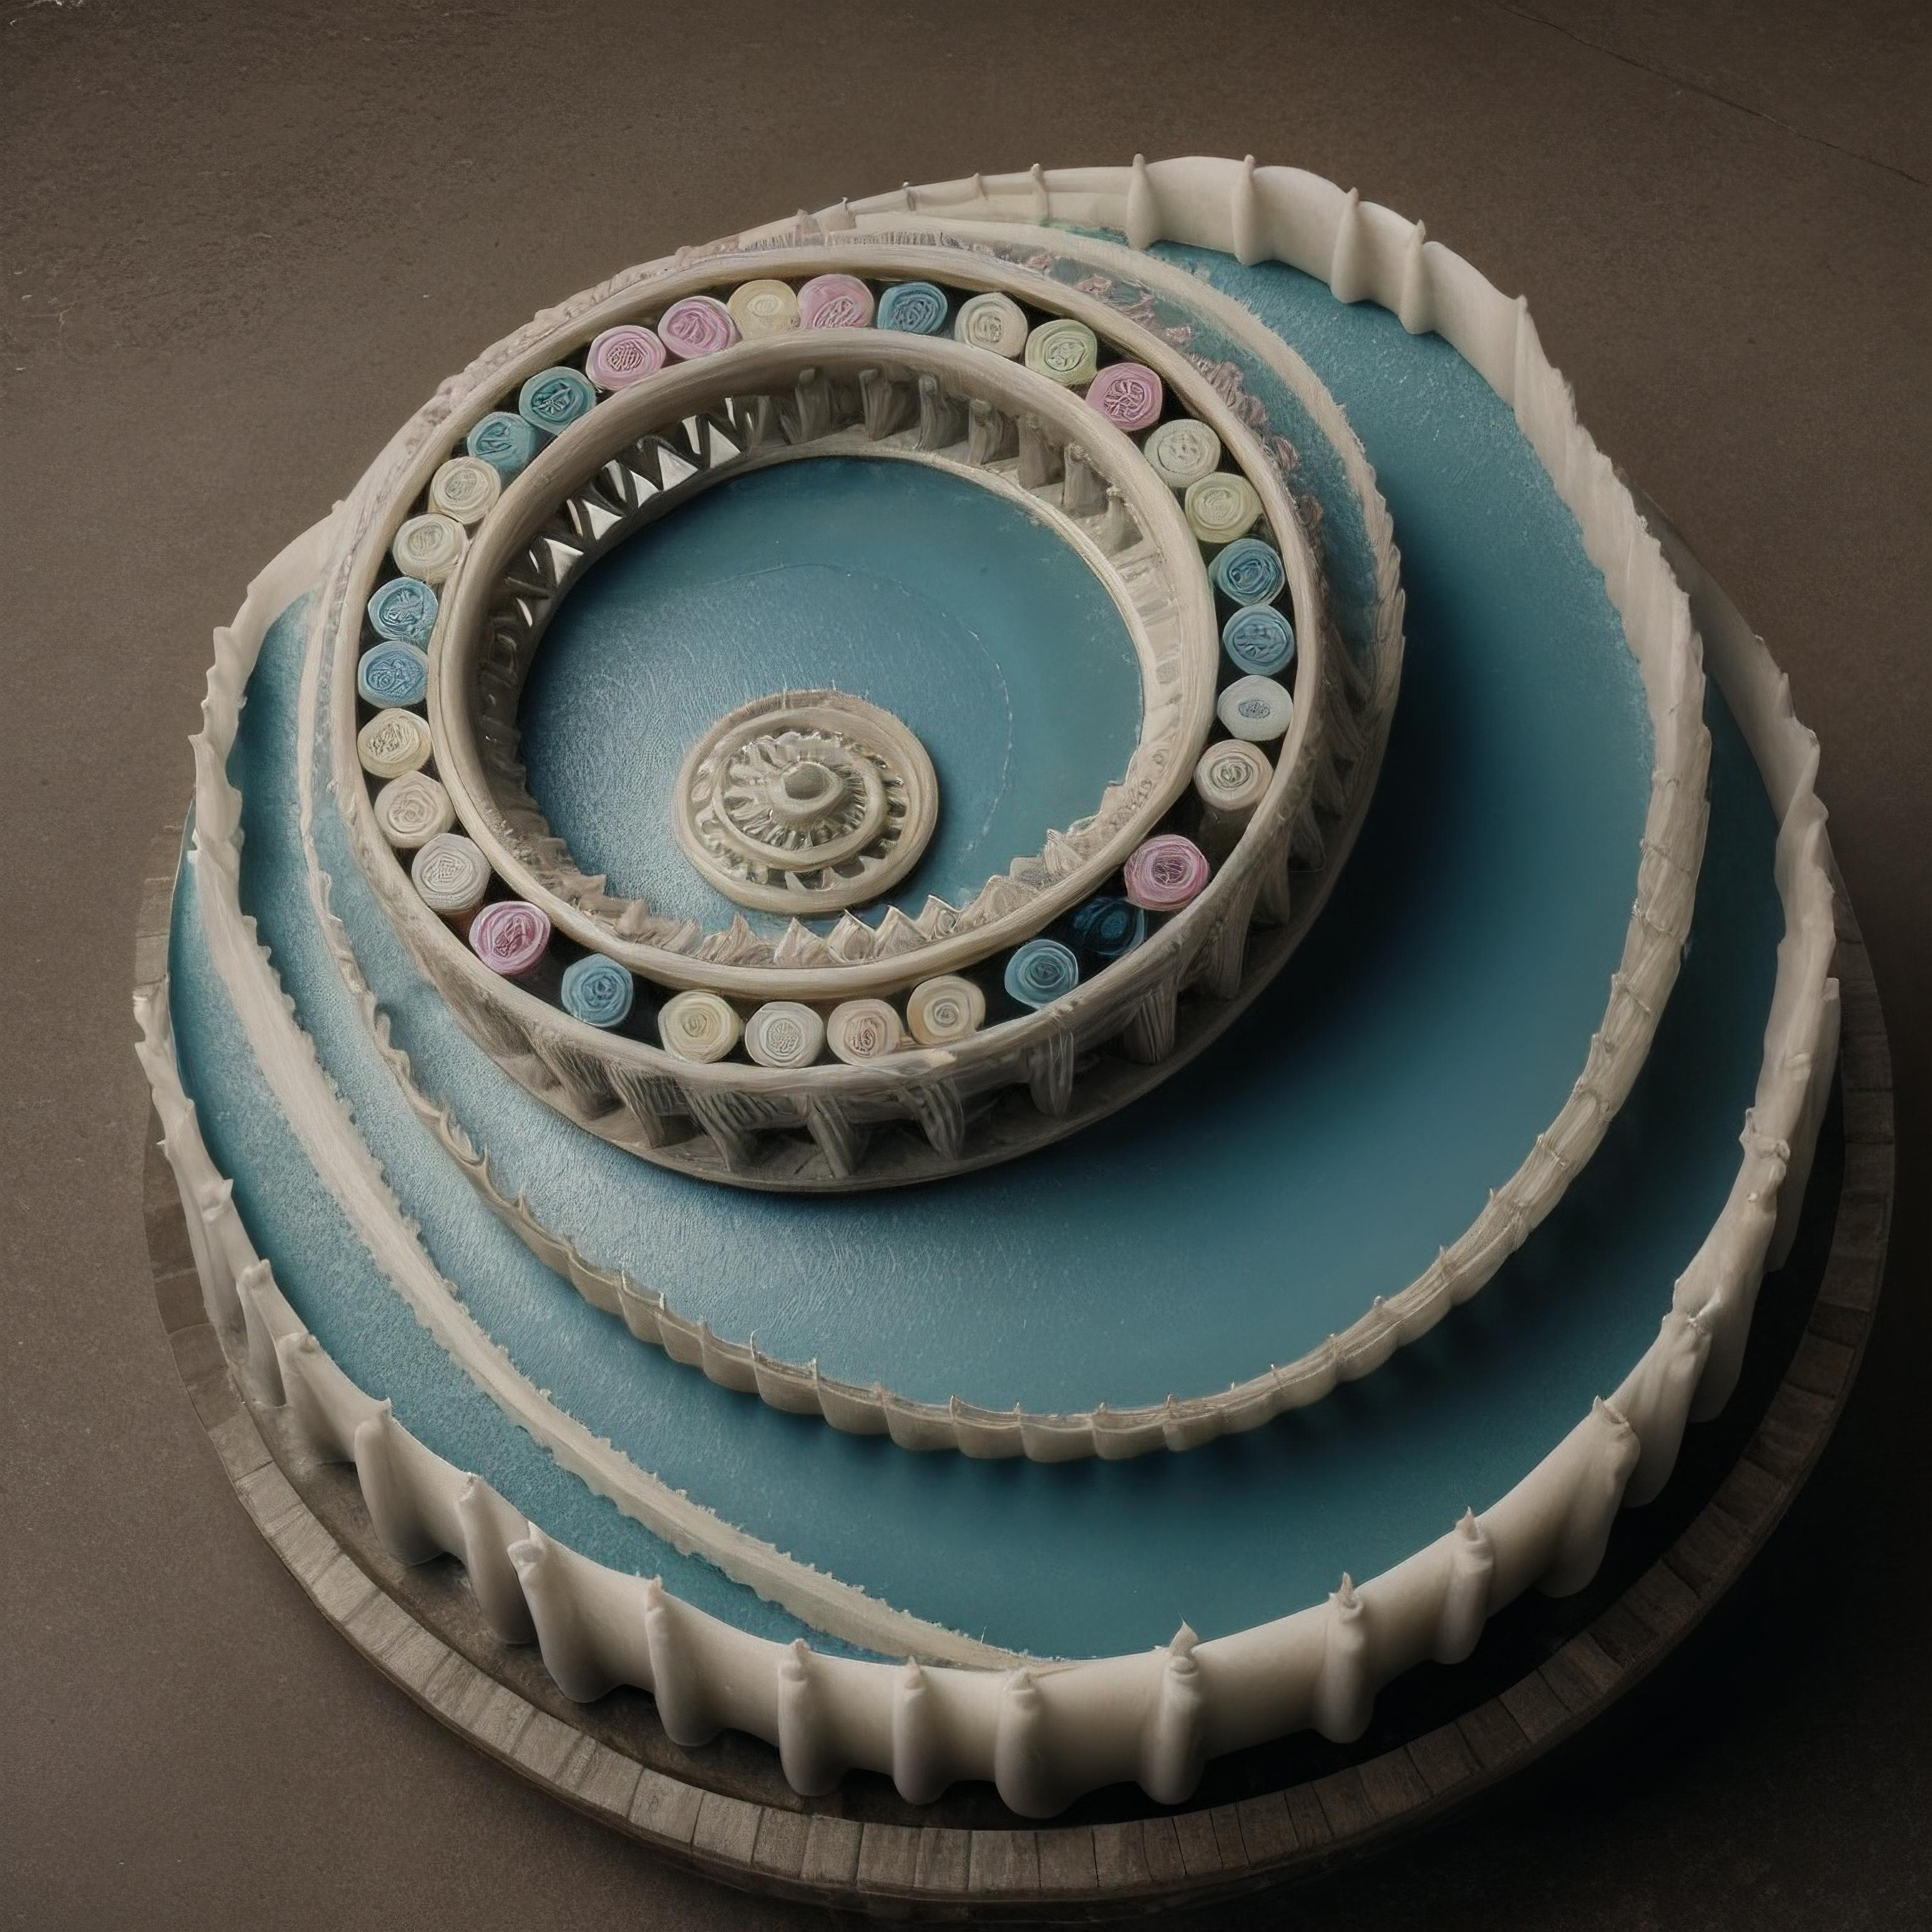 A multi-tiered cake with a blue frosting base and white and pink decorations on top.